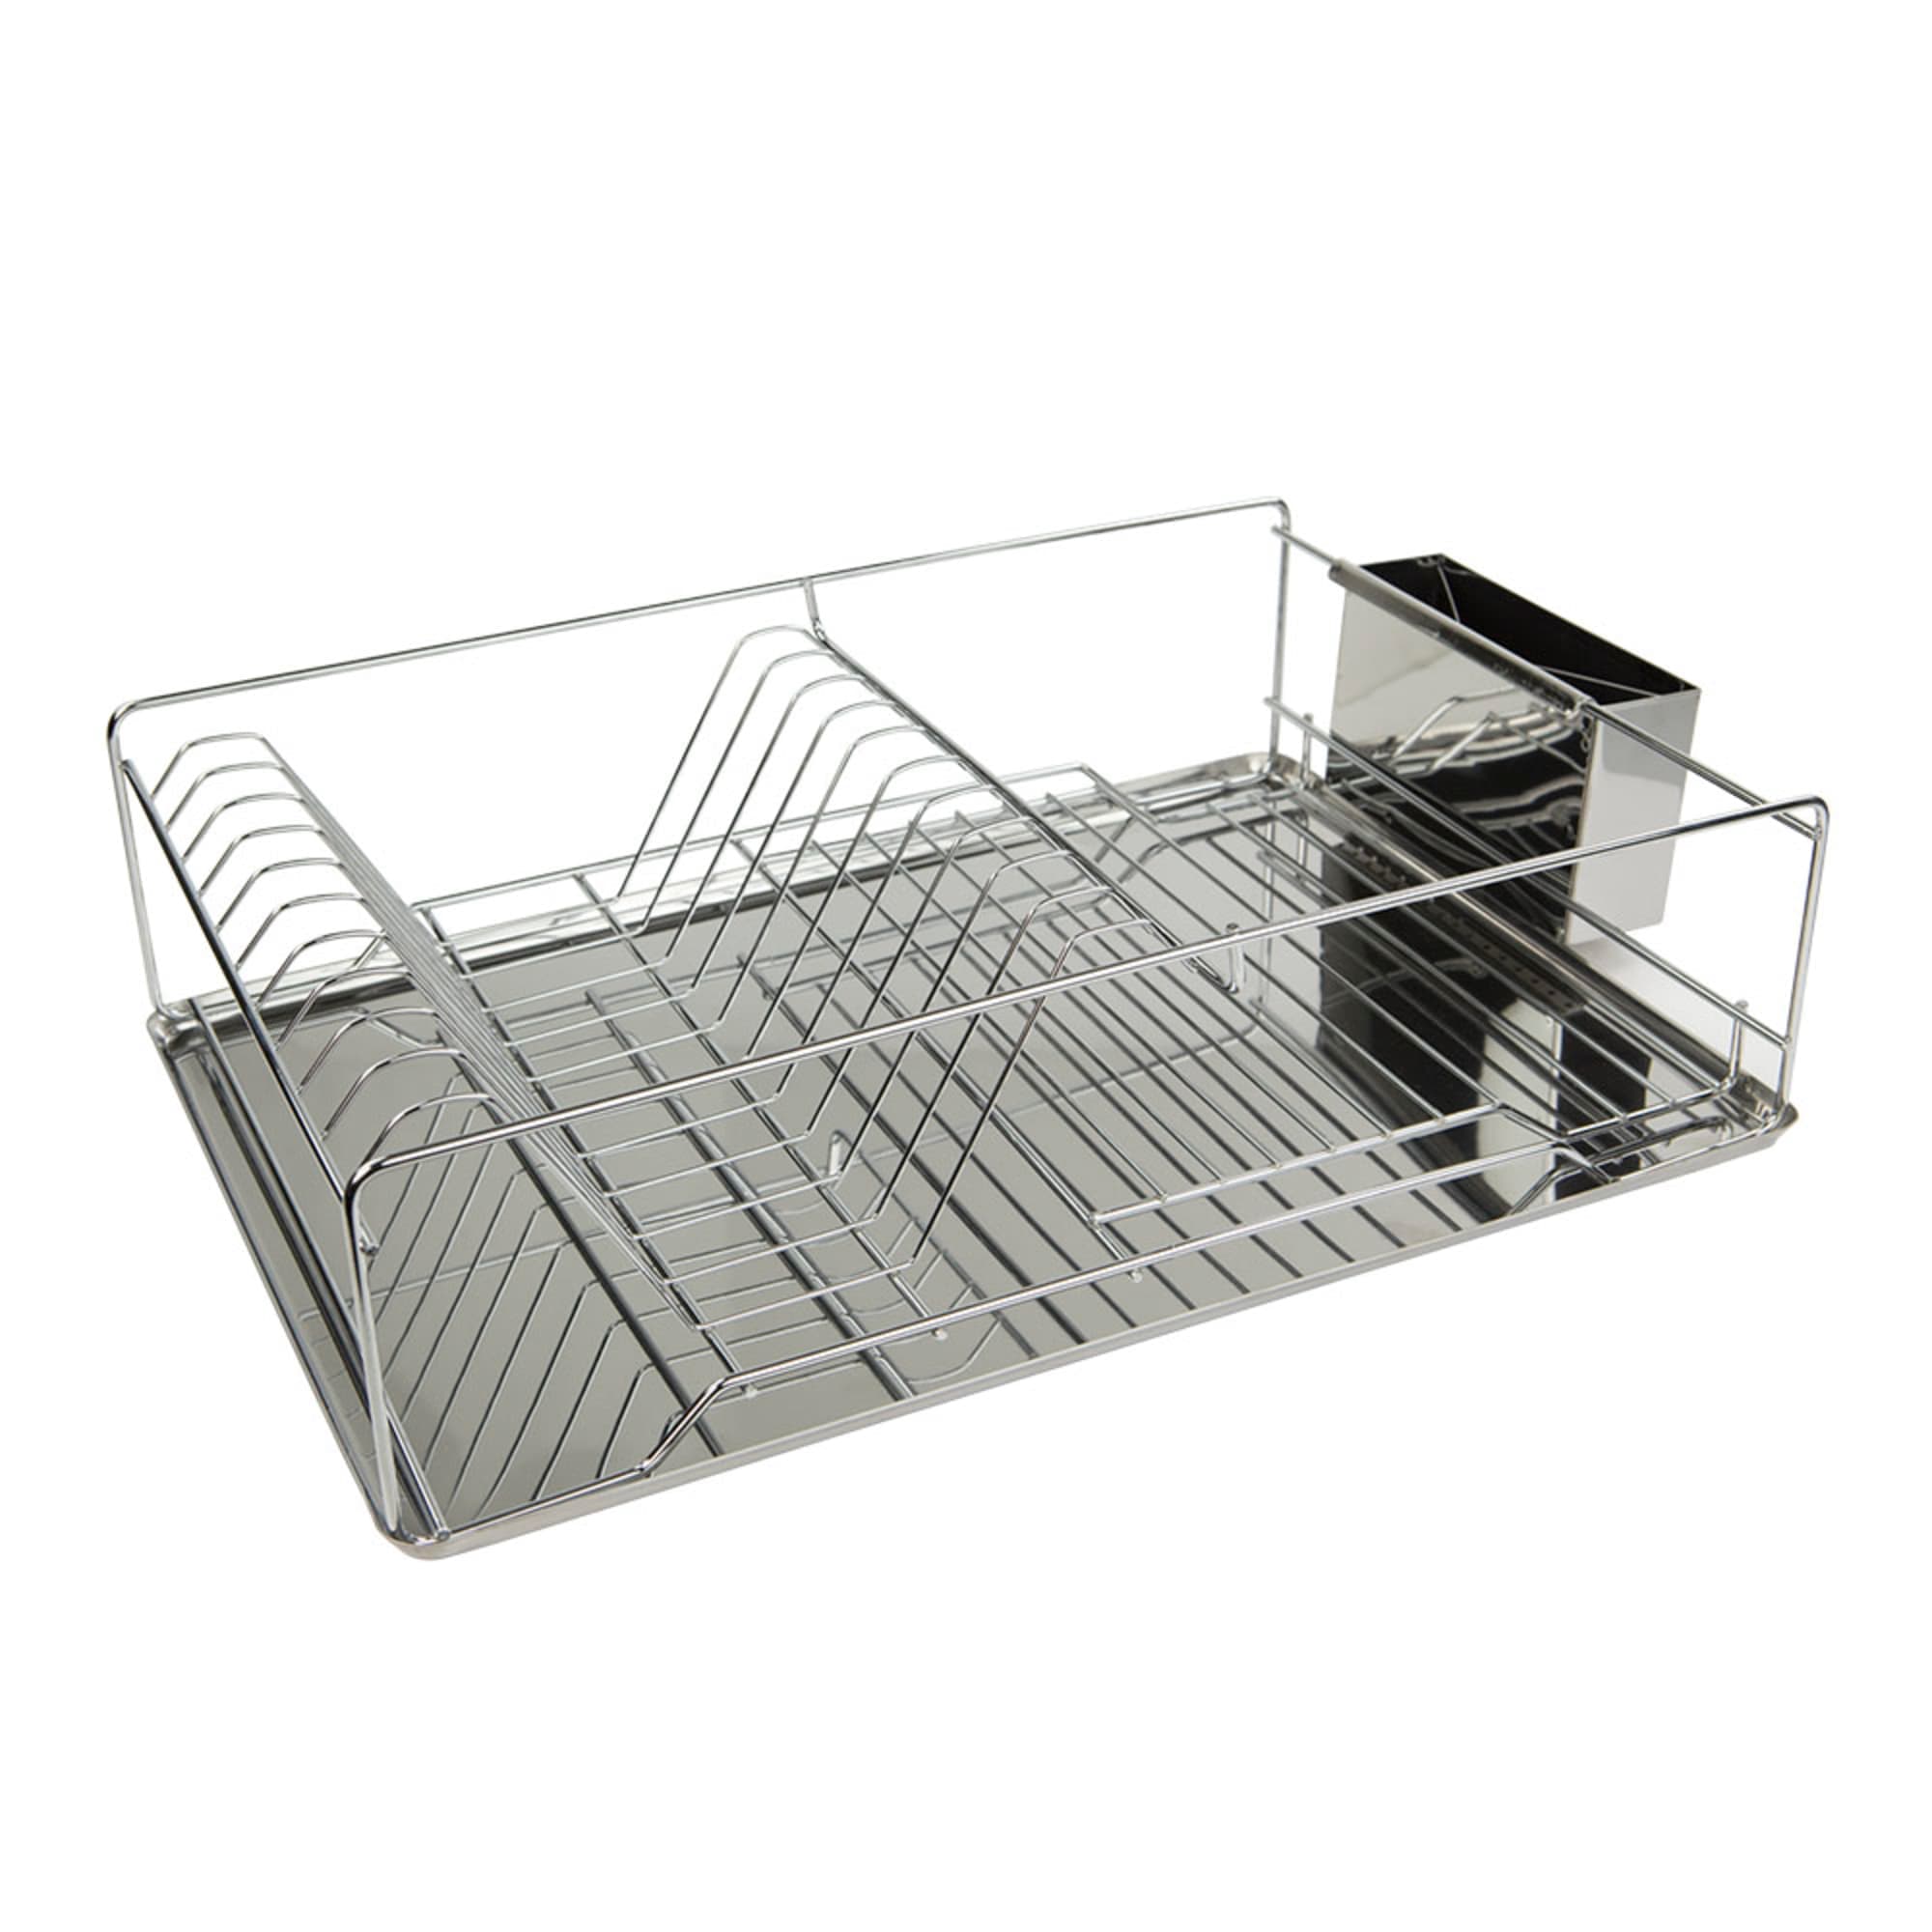 Home Basics Chrome Plated Steel Dish Rack with Tray $25.00 EACH, CASE PACK OF 6